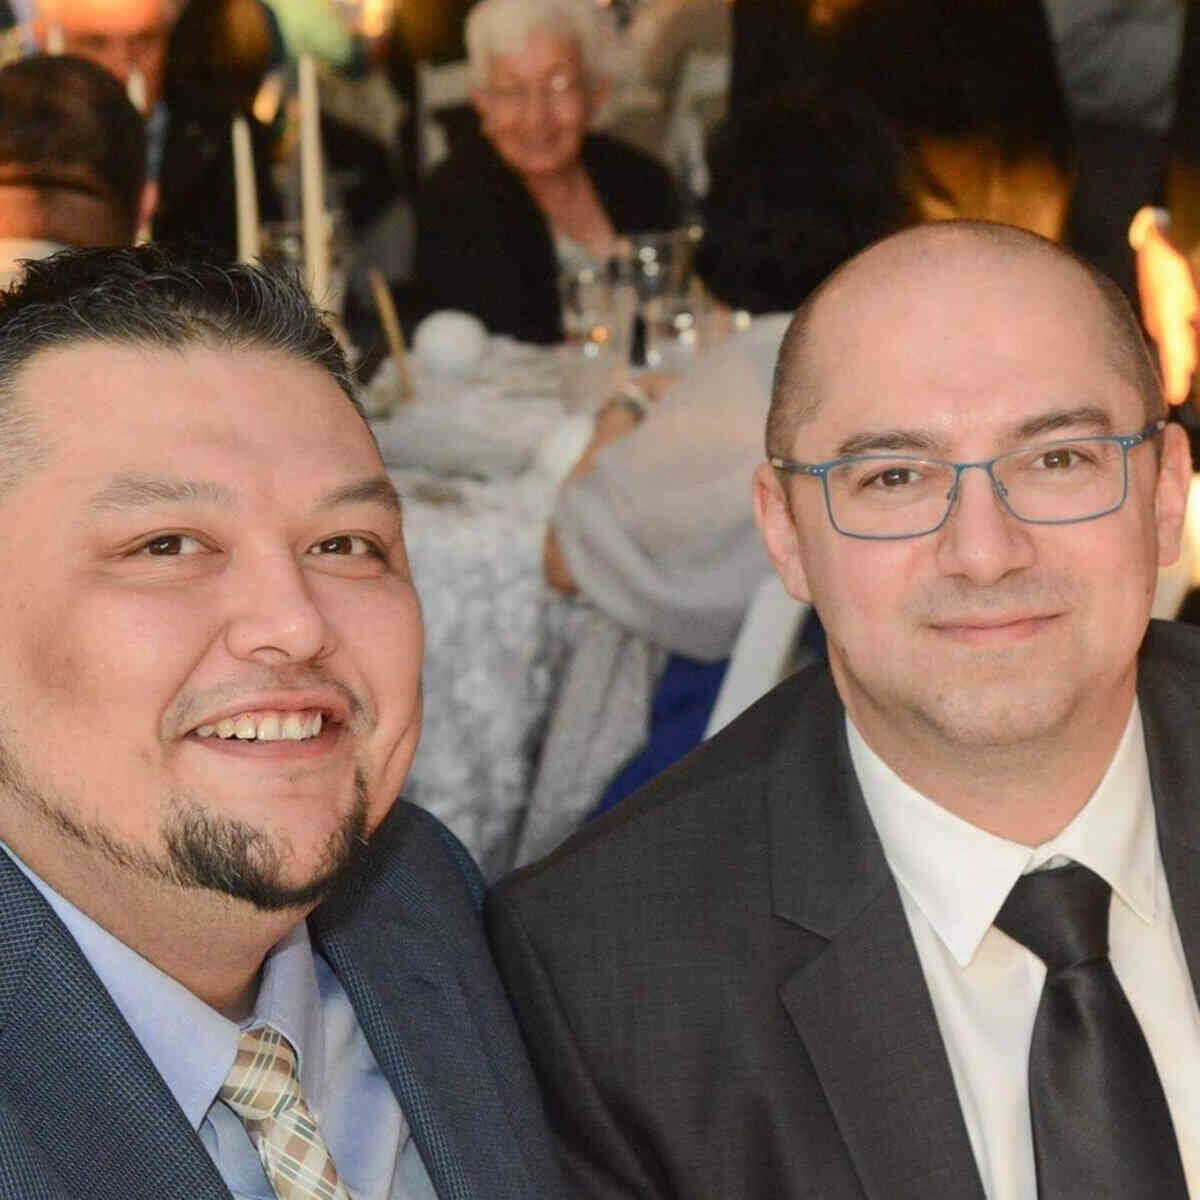 Gay Man’s Immigration Spousal Petition Revived